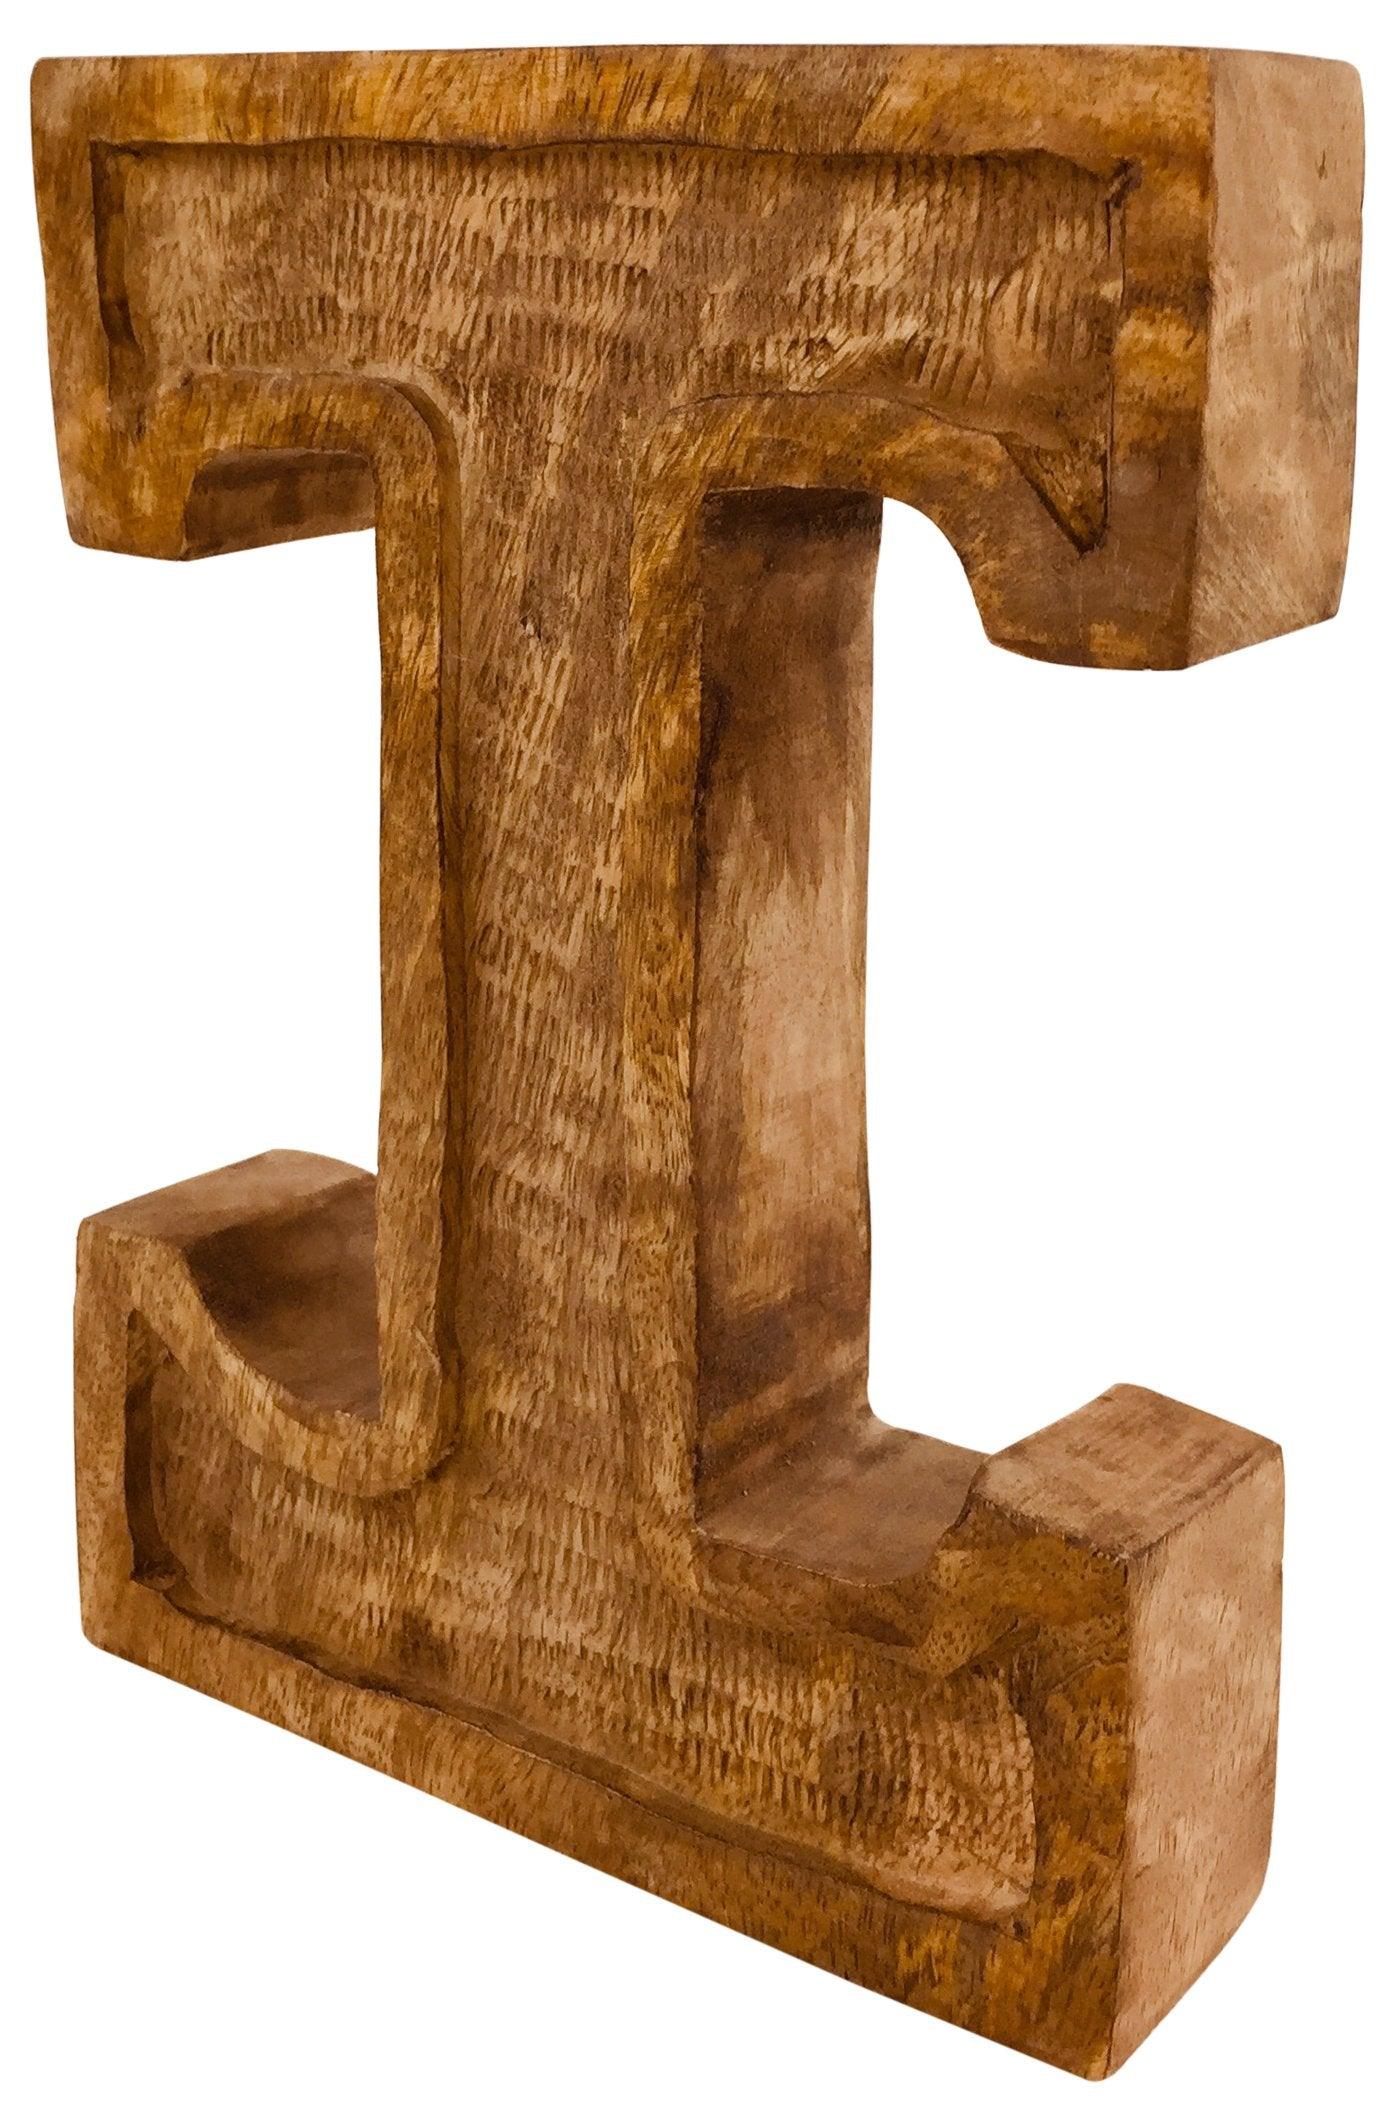 View Hand Carved Wooden Embossed Letter I information